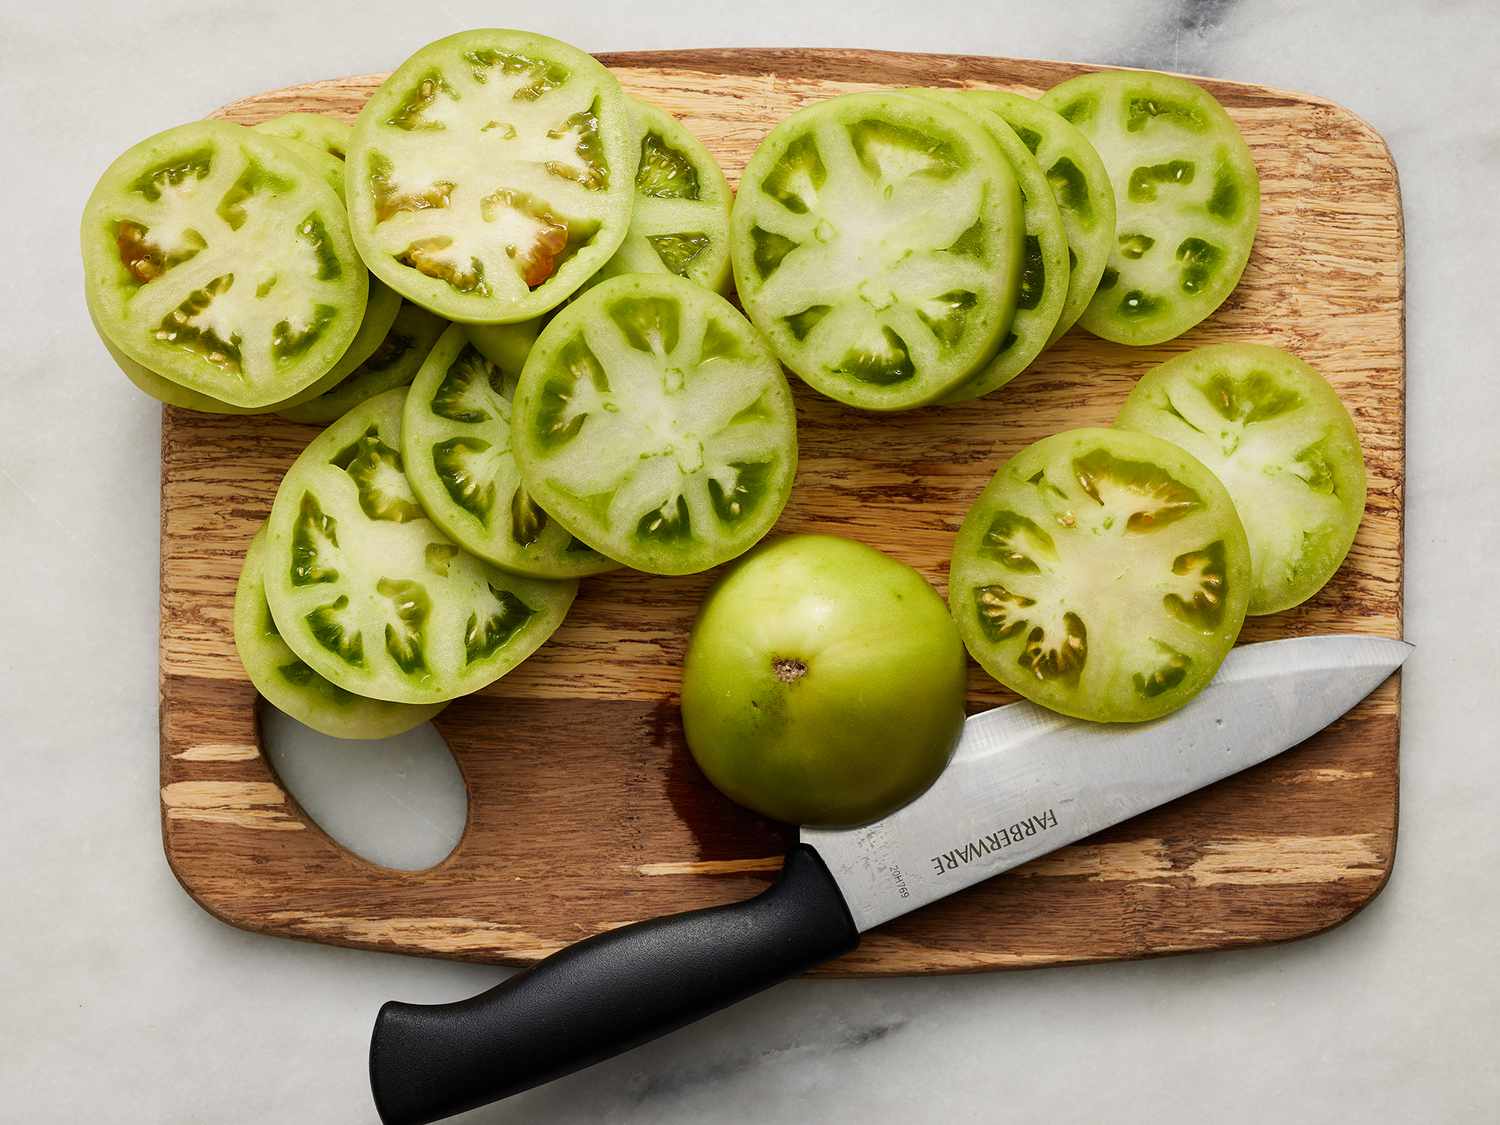 How To Store Green Tomatoes For Frying